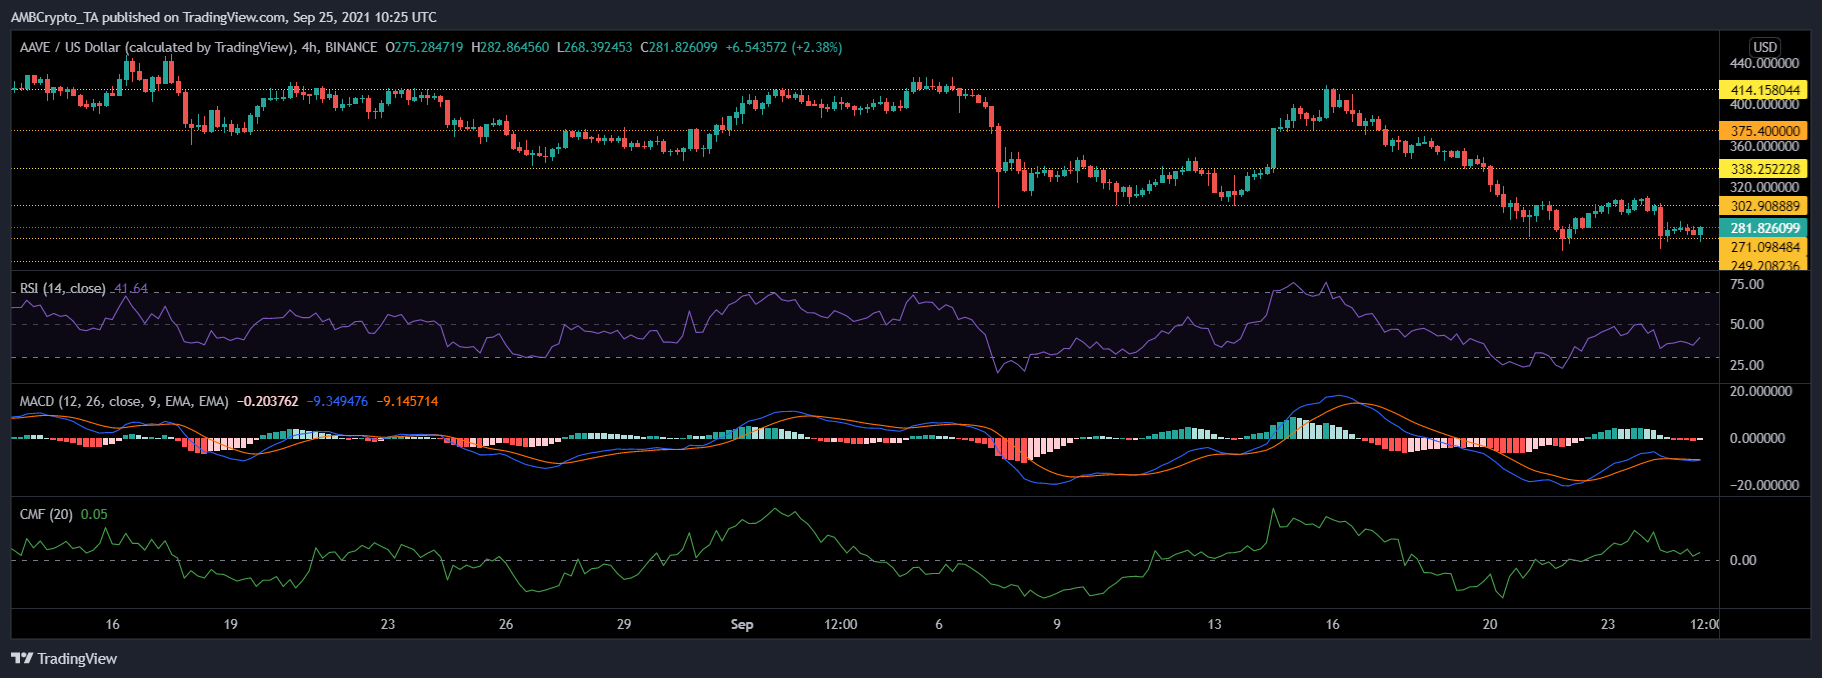 Bitcoin Cash, AAVE and Verge Price Analysis: 25 September 